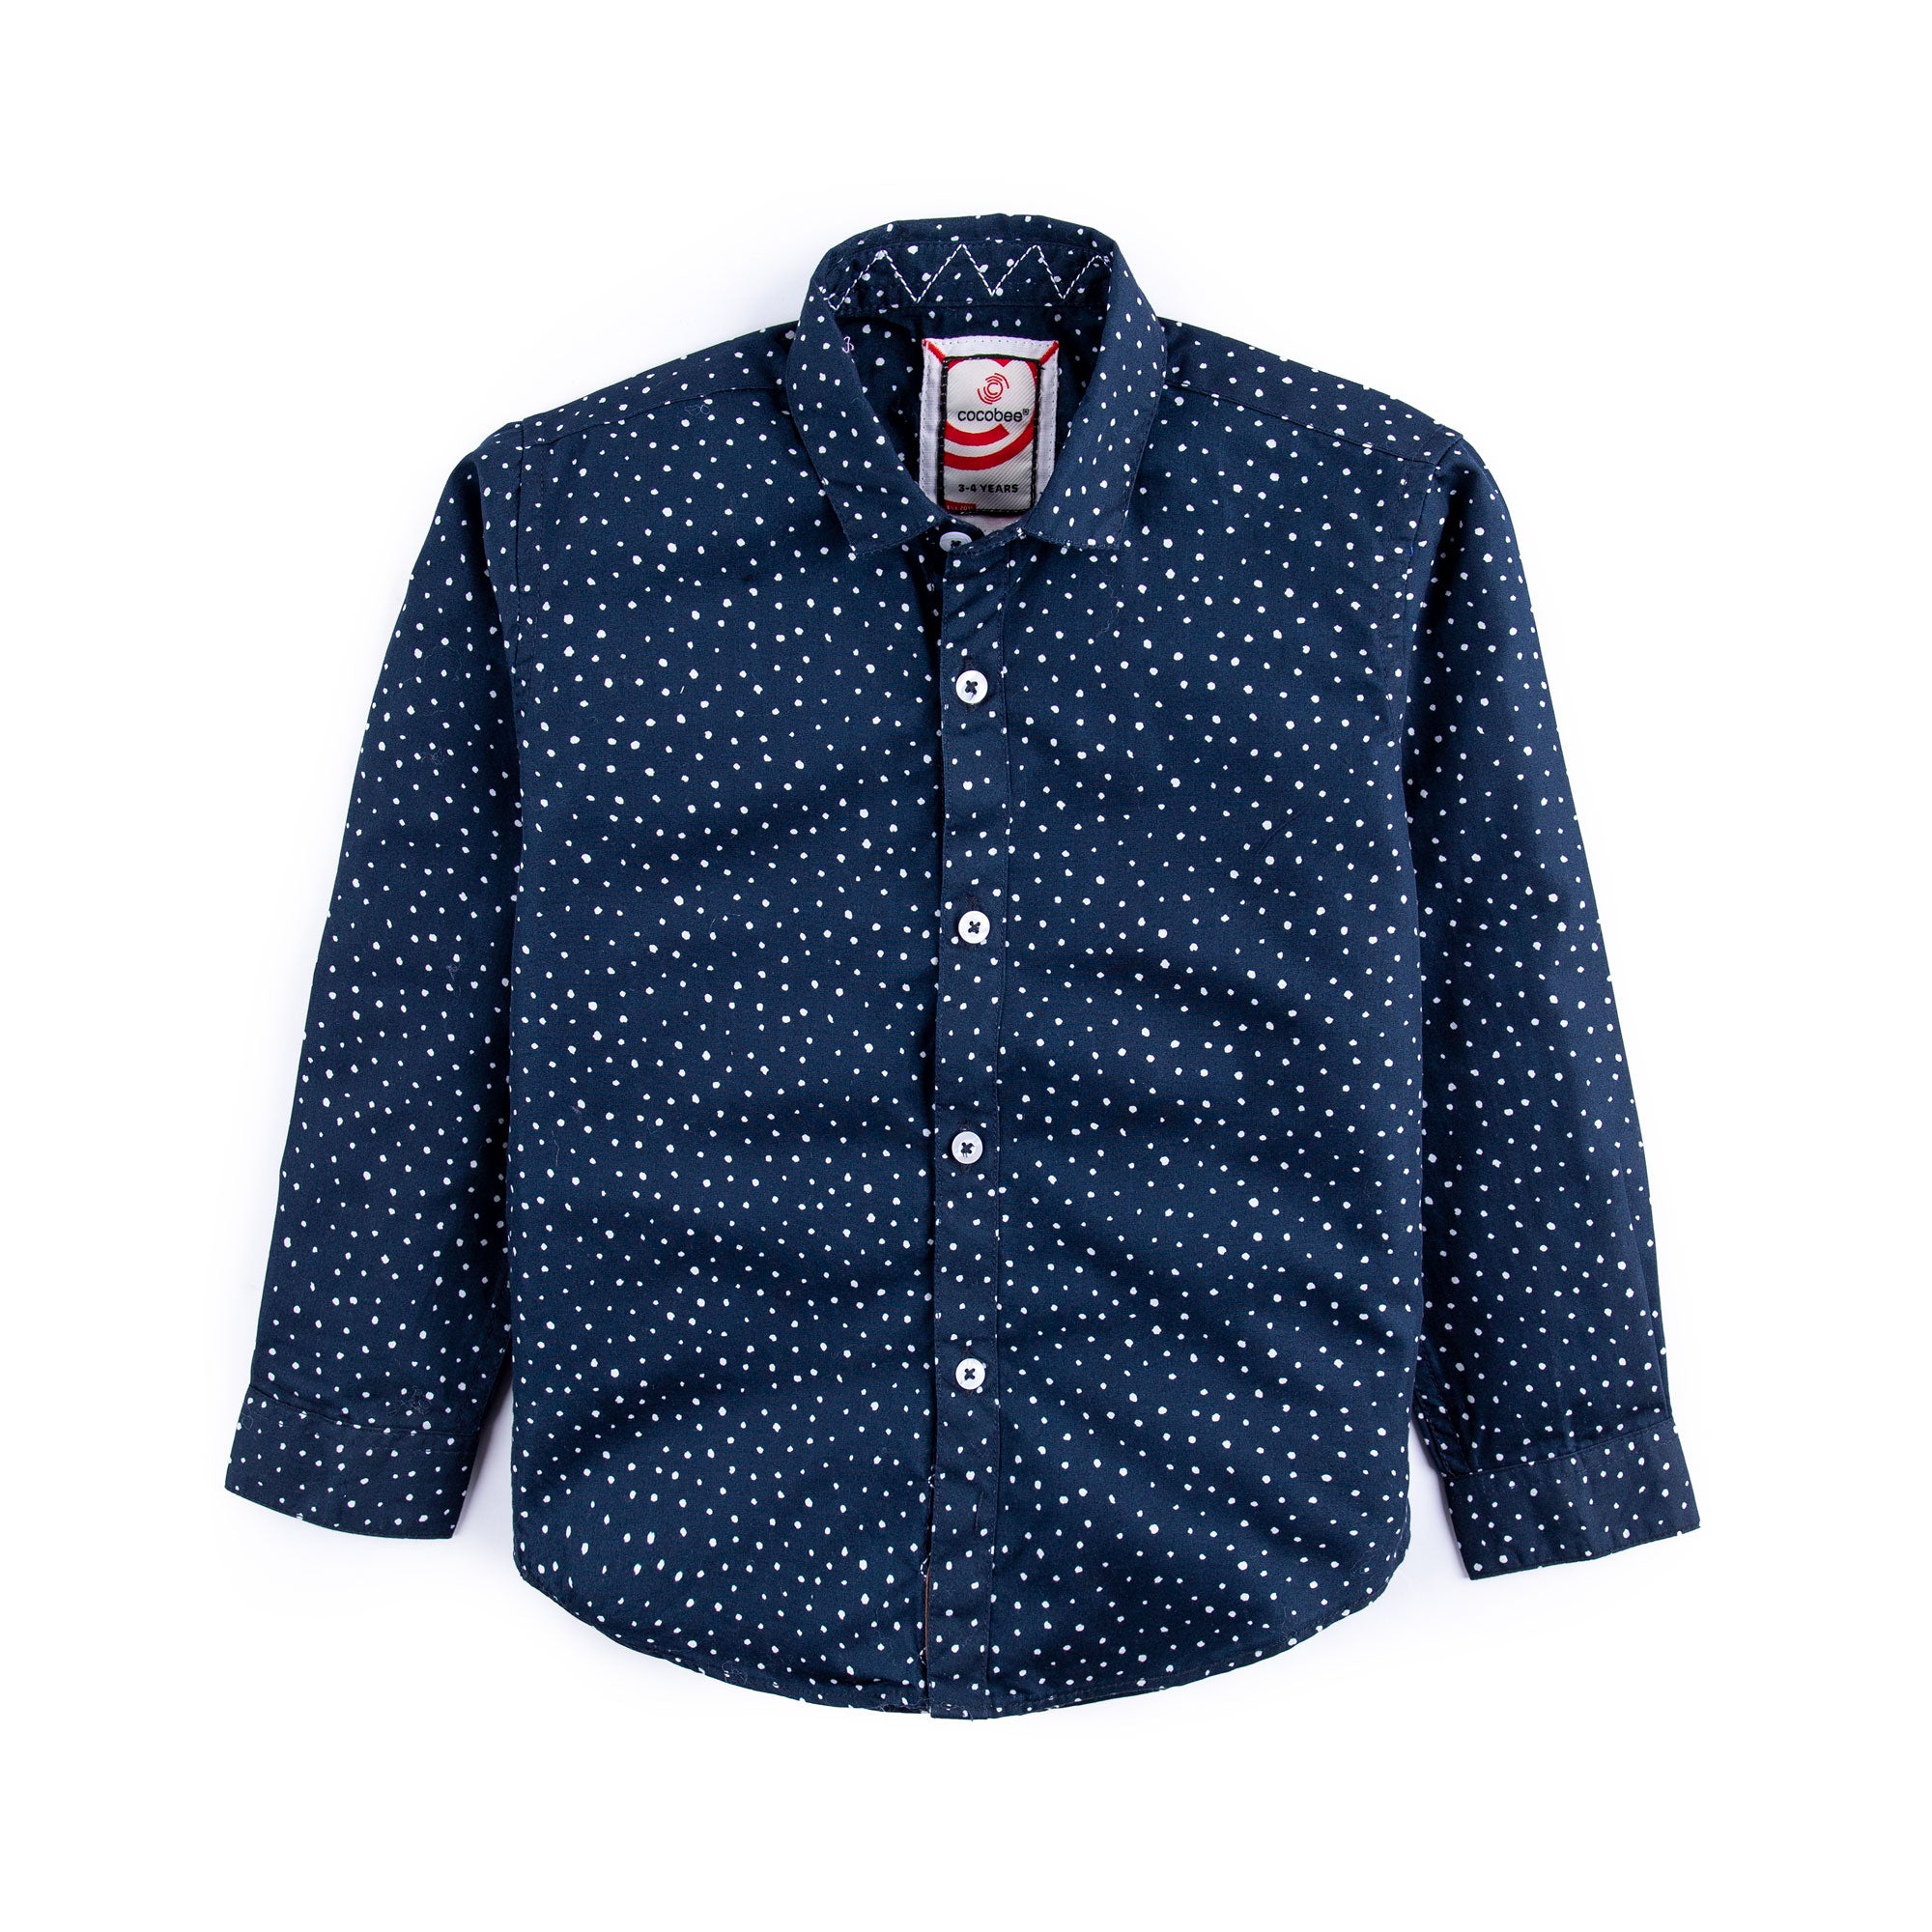 Navy Dotted Shirt